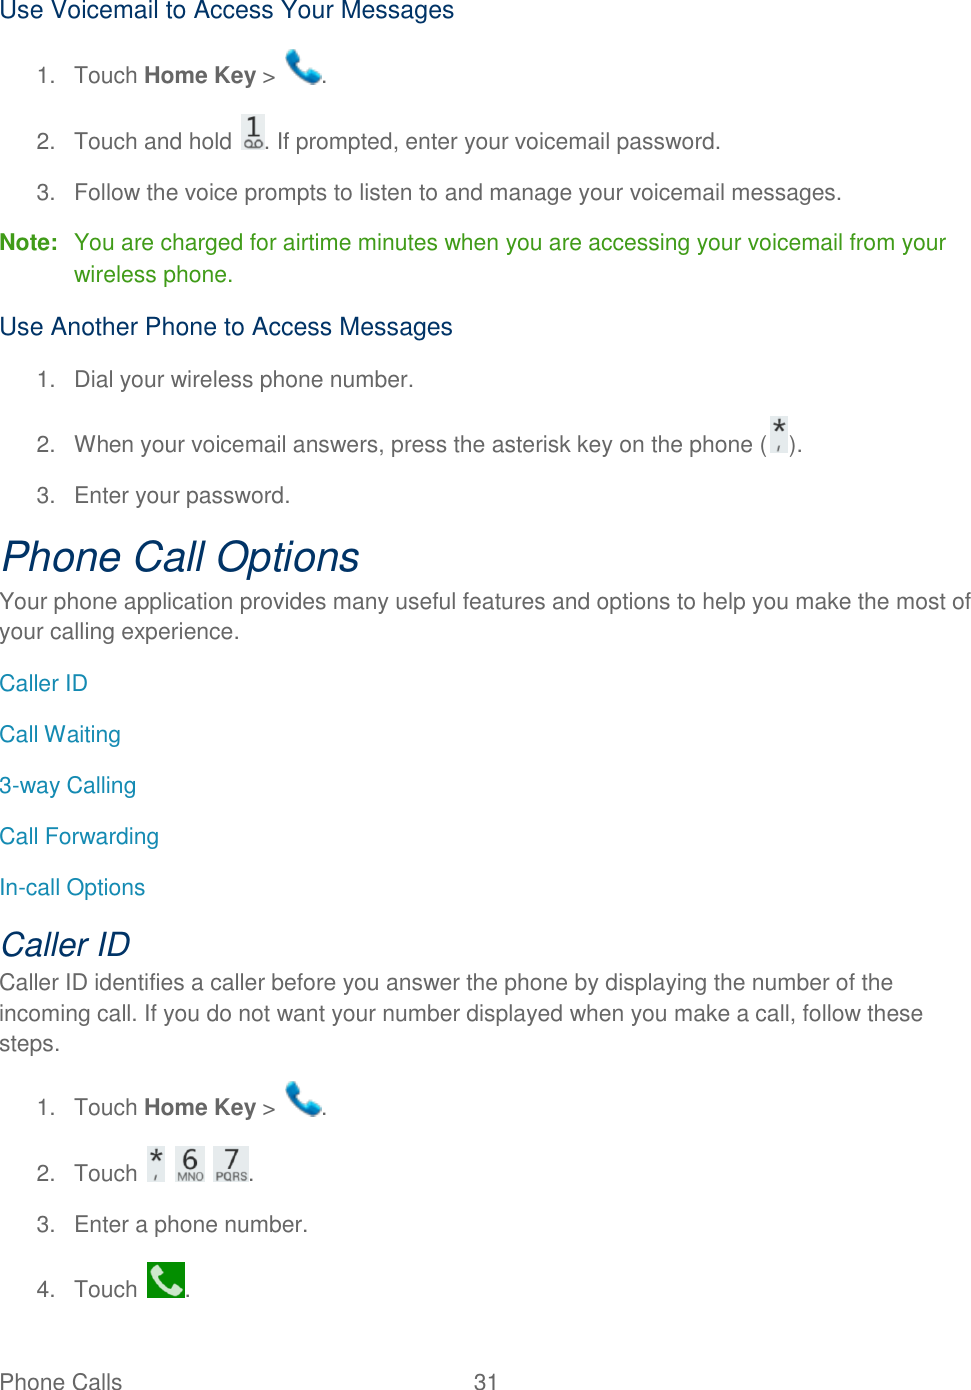 Phone Calls  31   Use Voicemail to Access Your Messages 1.  Touch Home Key &gt;  . 2.  Touch and hold  . If prompted, enter your voicemail password. 3.  Follow the voice prompts to listen to and manage your voicemail messages. Note:  You are charged for airtime minutes when you are accessing your voicemail from your wireless phone. Use Another Phone to Access Messages 1.  Dial your wireless phone number. 2.  When your voicemail answers, press the asterisk key on the phone ( ). 3.  Enter your password.  Phone Call Options Your phone application provides many useful features and options to help you make the most of your calling experience. Caller ID Call Waiting 3-way Calling Call Forwarding In-call Options Caller ID Caller ID identifies a caller before you answer the phone by displaying the number of the incoming call. If you do not want your number displayed when you make a call, follow these steps. 1.  Touch Home Key &gt;  . 2.  Touch      . 3.  Enter a phone number. 4.  Touch  . 